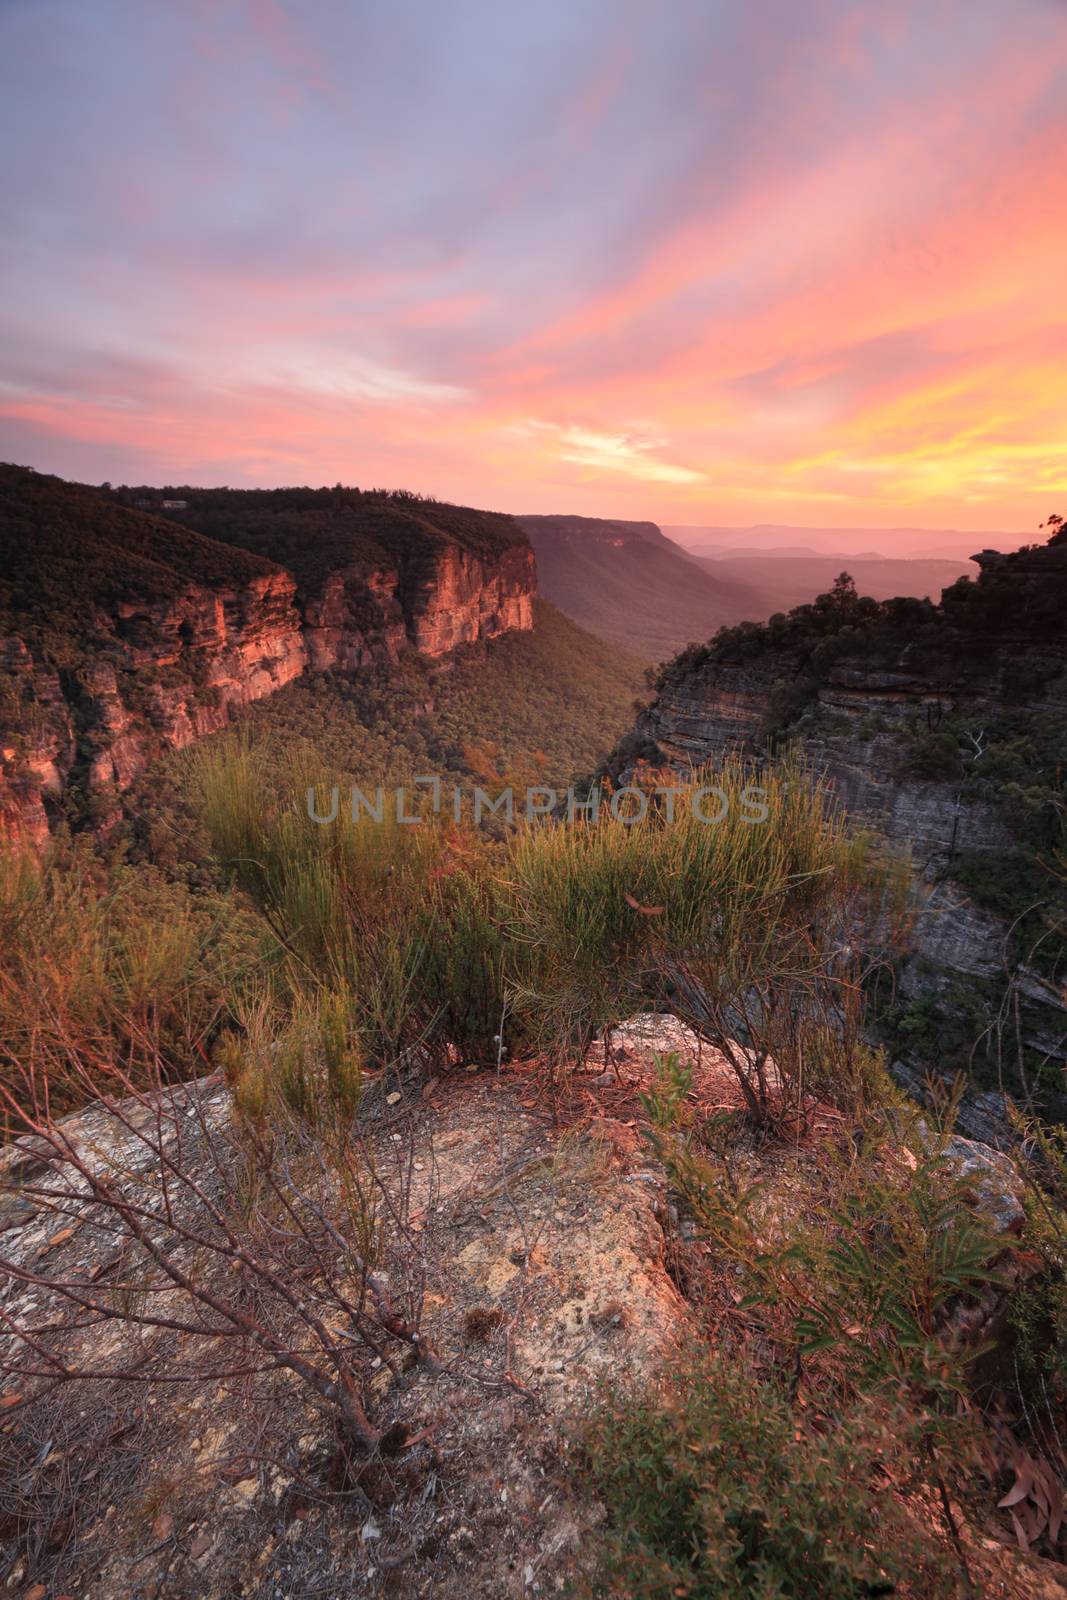 Beautiful views into Nellies Glen from Katoomba as the sun sets in summer casting a warm orange glow into the valleys, cliffs and landscape